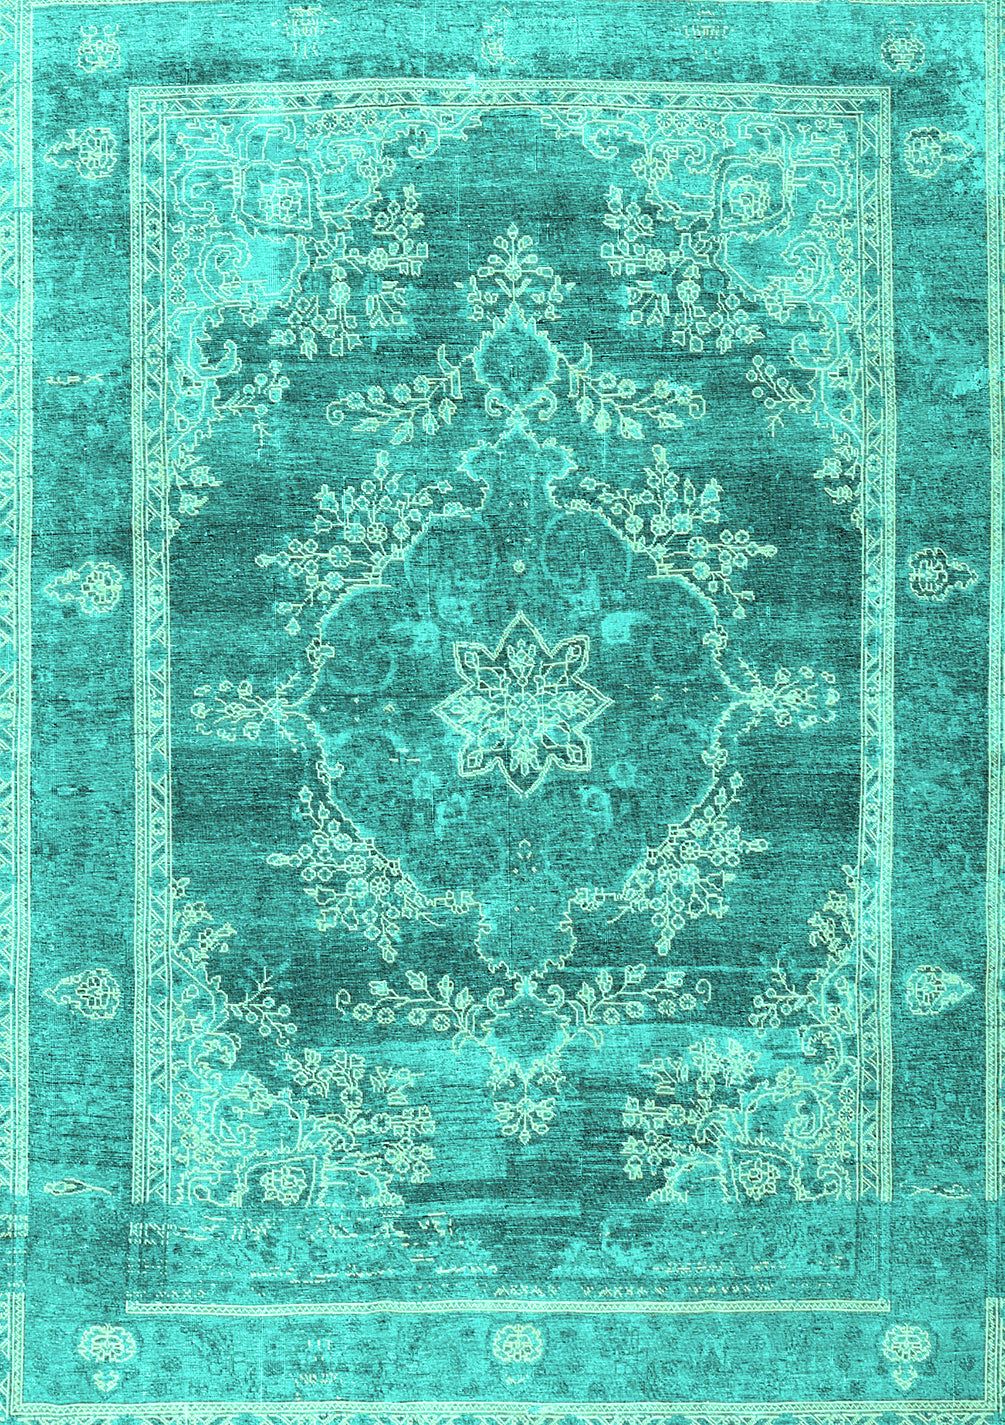 The colorful and exotic turquoise rugs to
brighten up your rooms